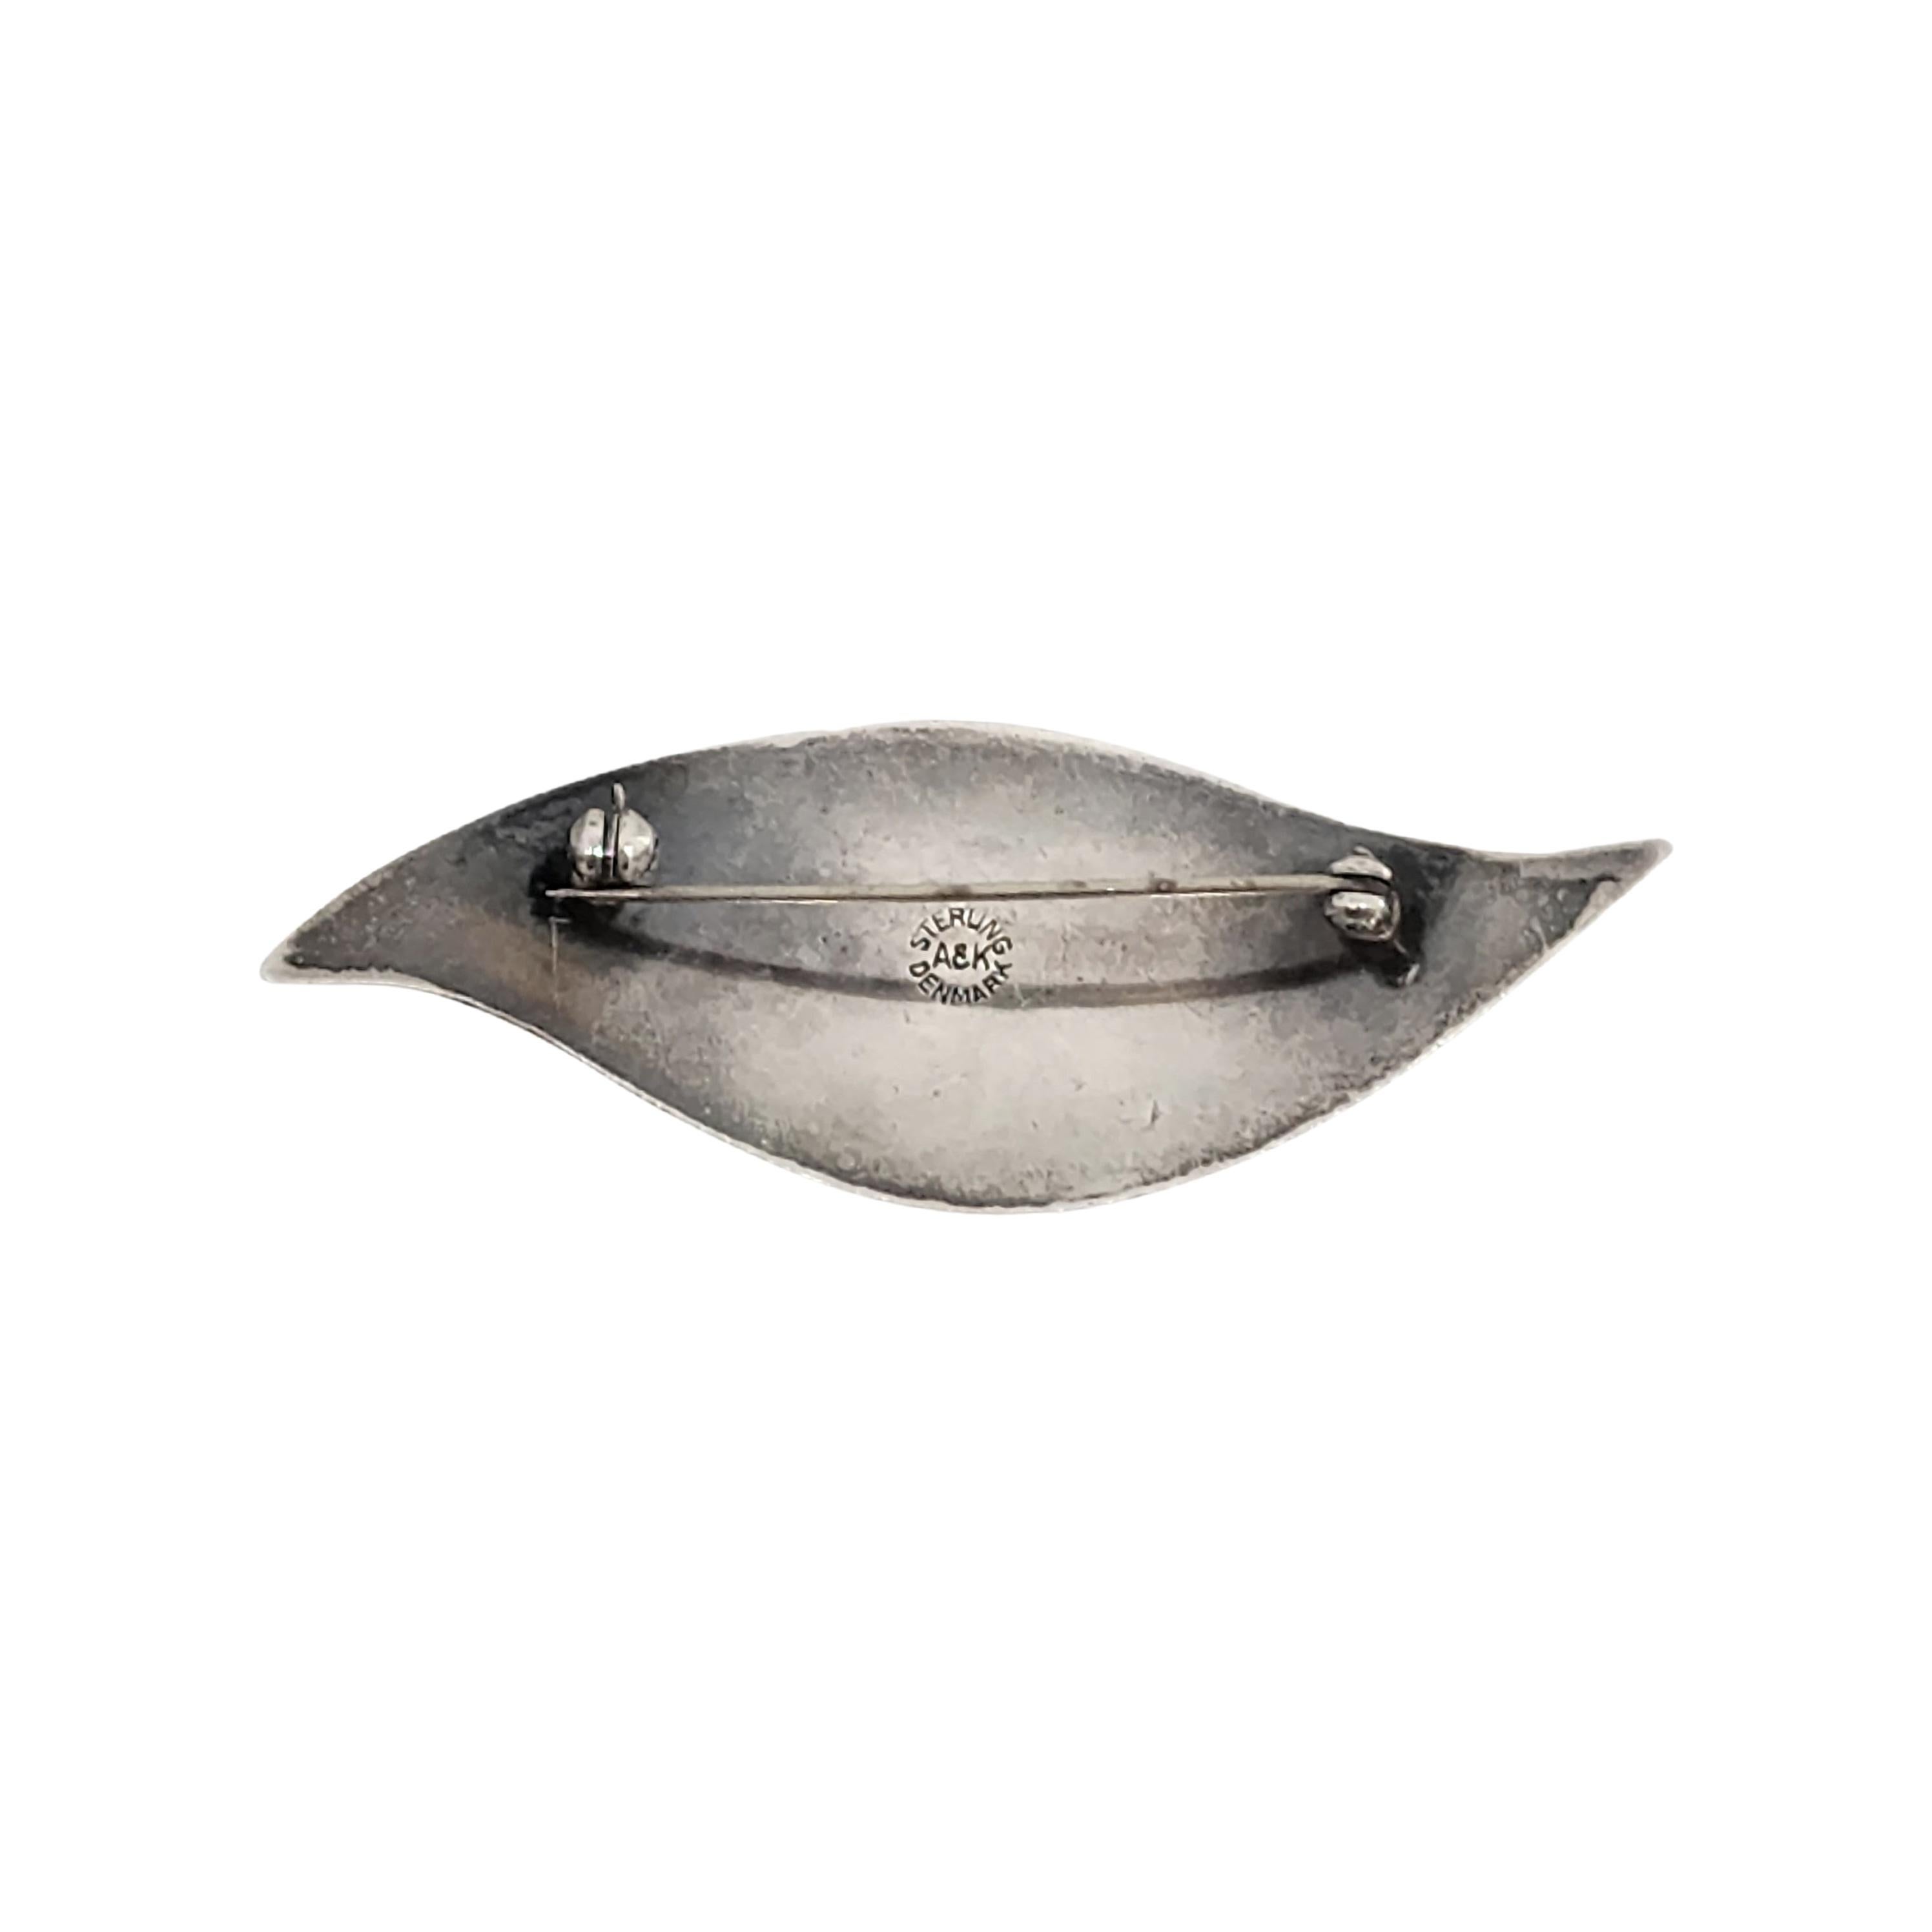 Vintage sterling silver leaf pin/brooch by Aarre & Krogh of Randers, Denmark, 1949-1990.

Beautiful leaf design with a highly polished finish.

Measures 2 3/4